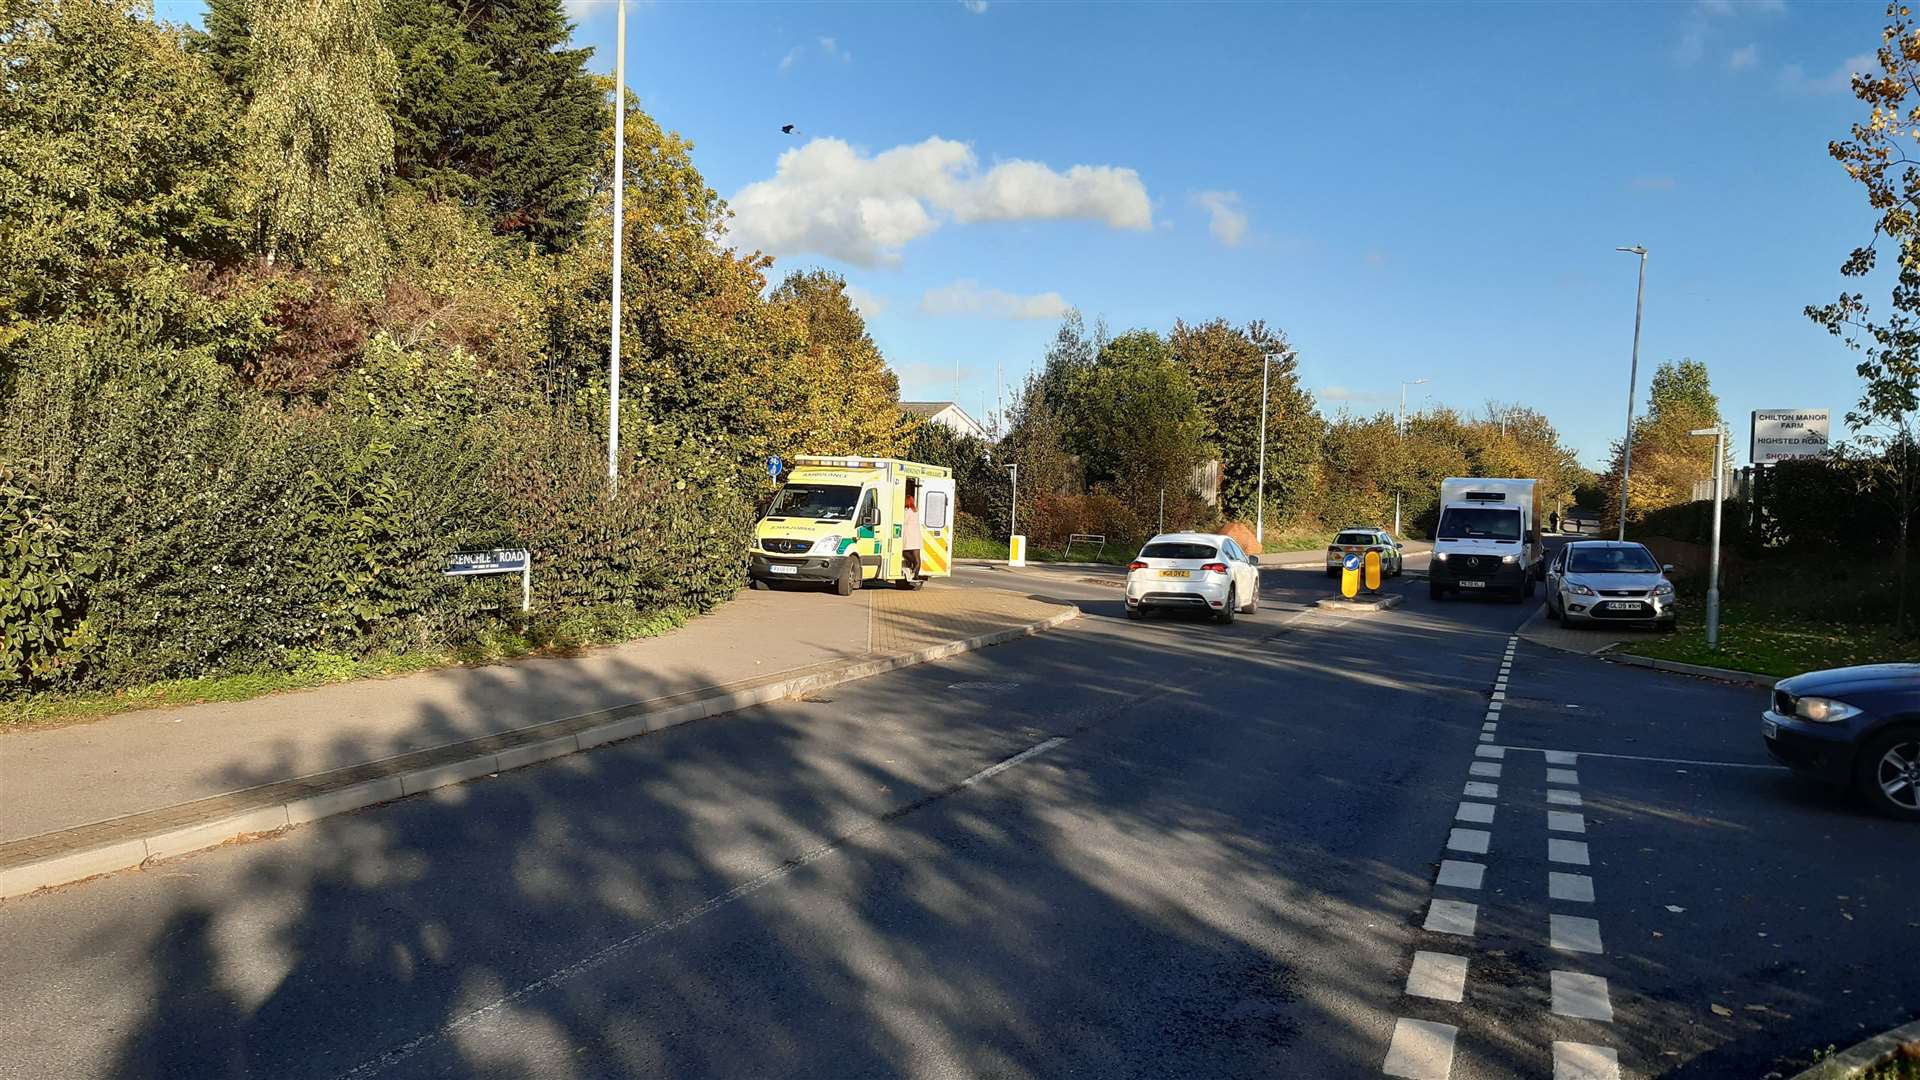 Emergency services were called to Swanstree Avenue in Sittingbourne following a crash